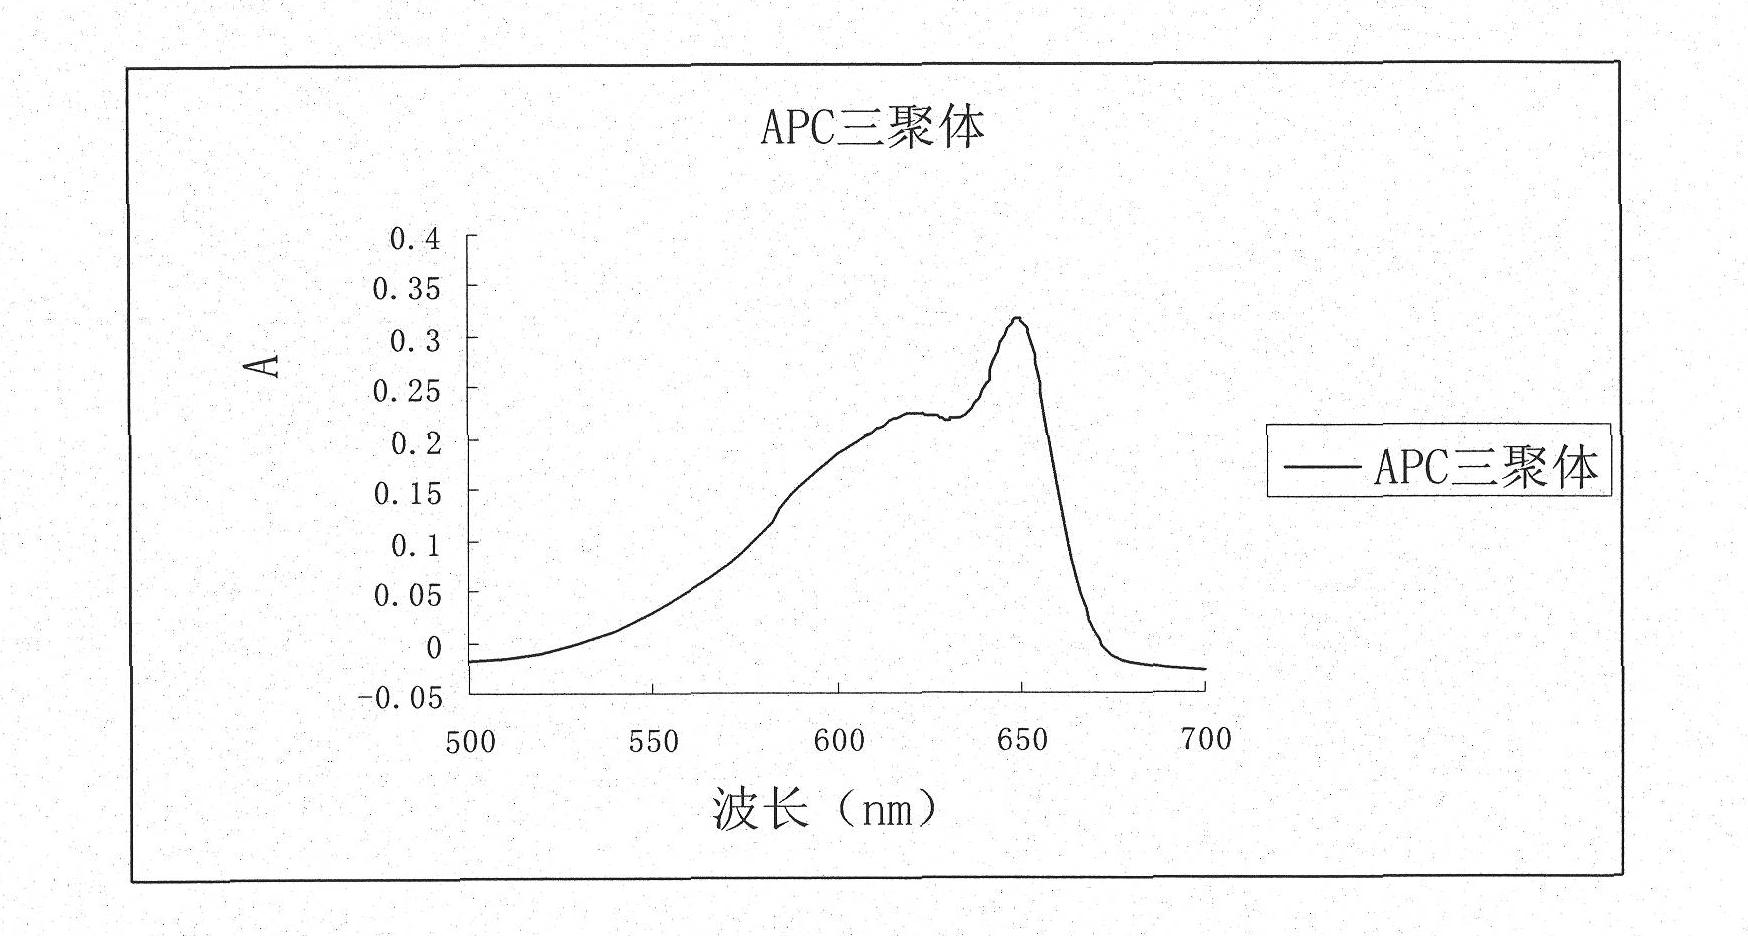 Method for preparing allophycocyanin tripolymer fluorescent protein